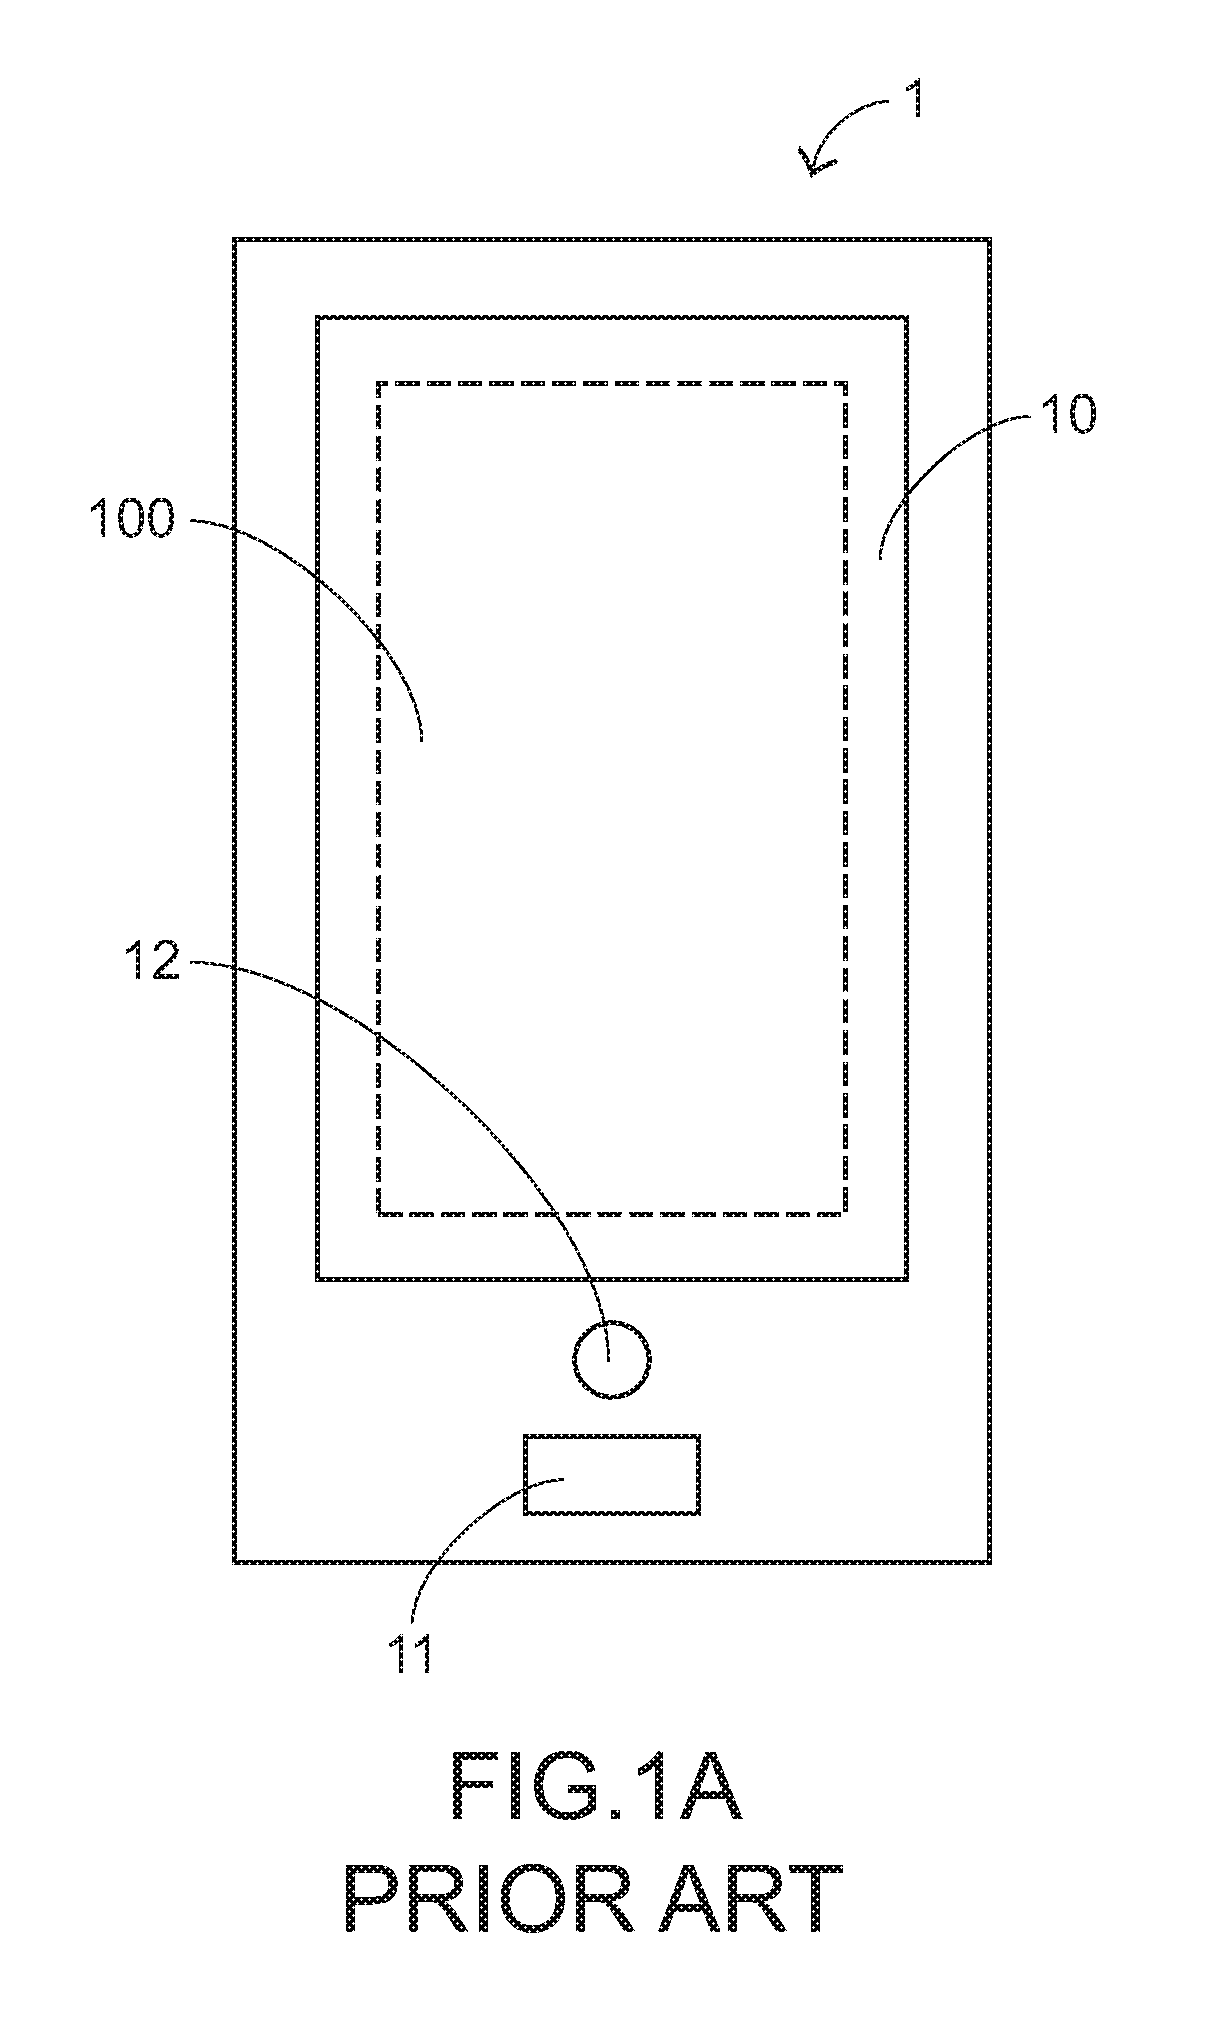 Method and electronic apparatus for creating biological feature data